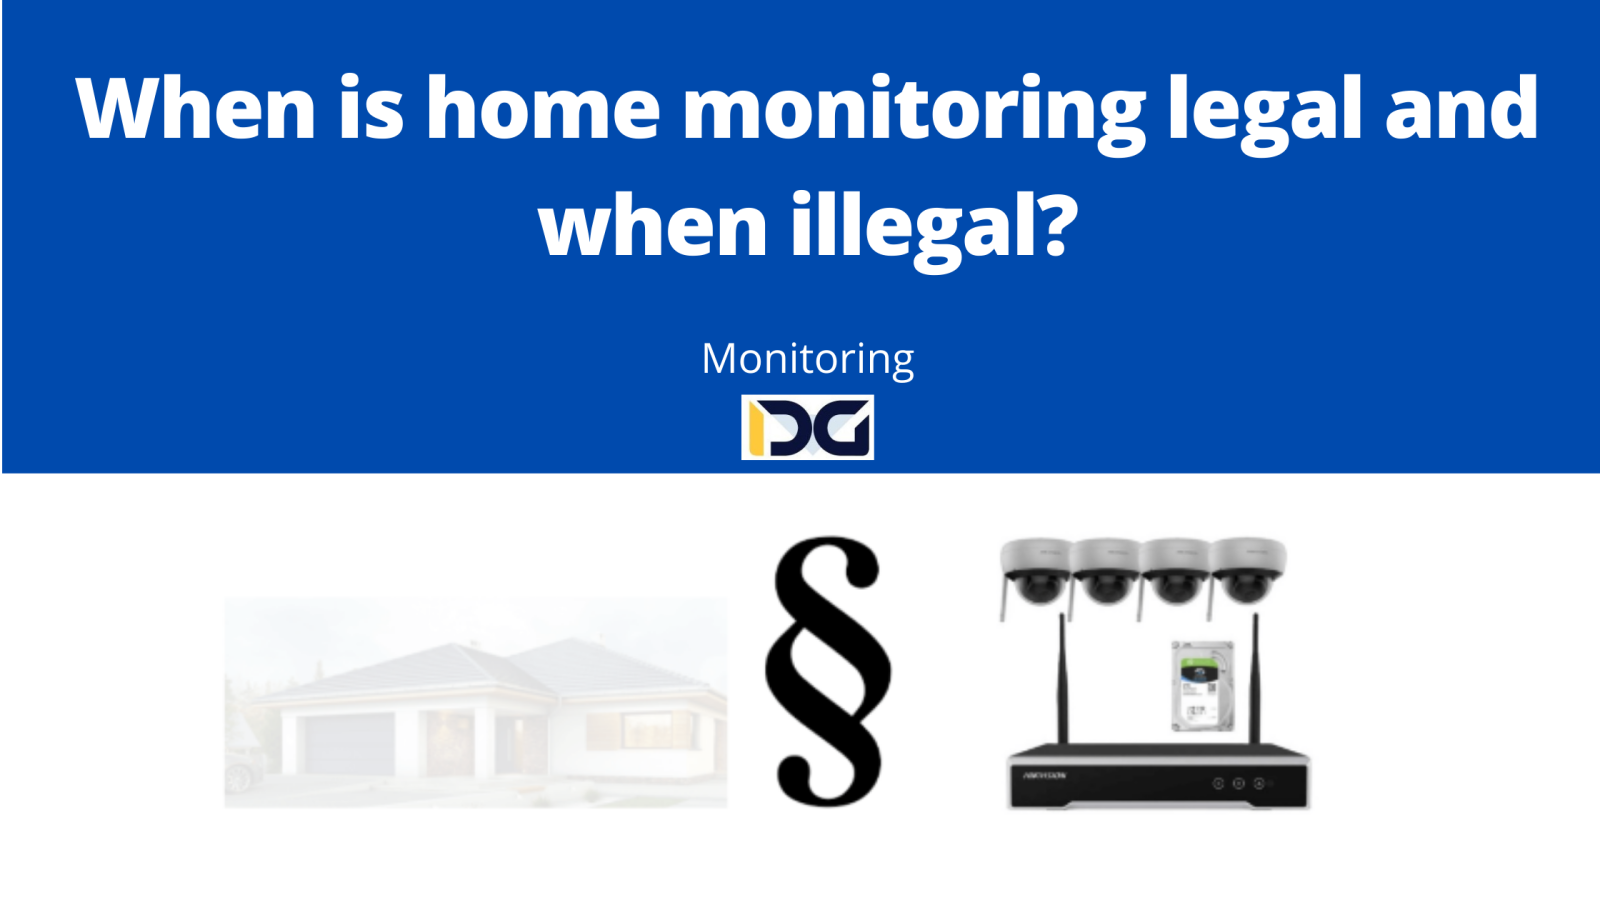 When is home monitoring legal and when illegal?